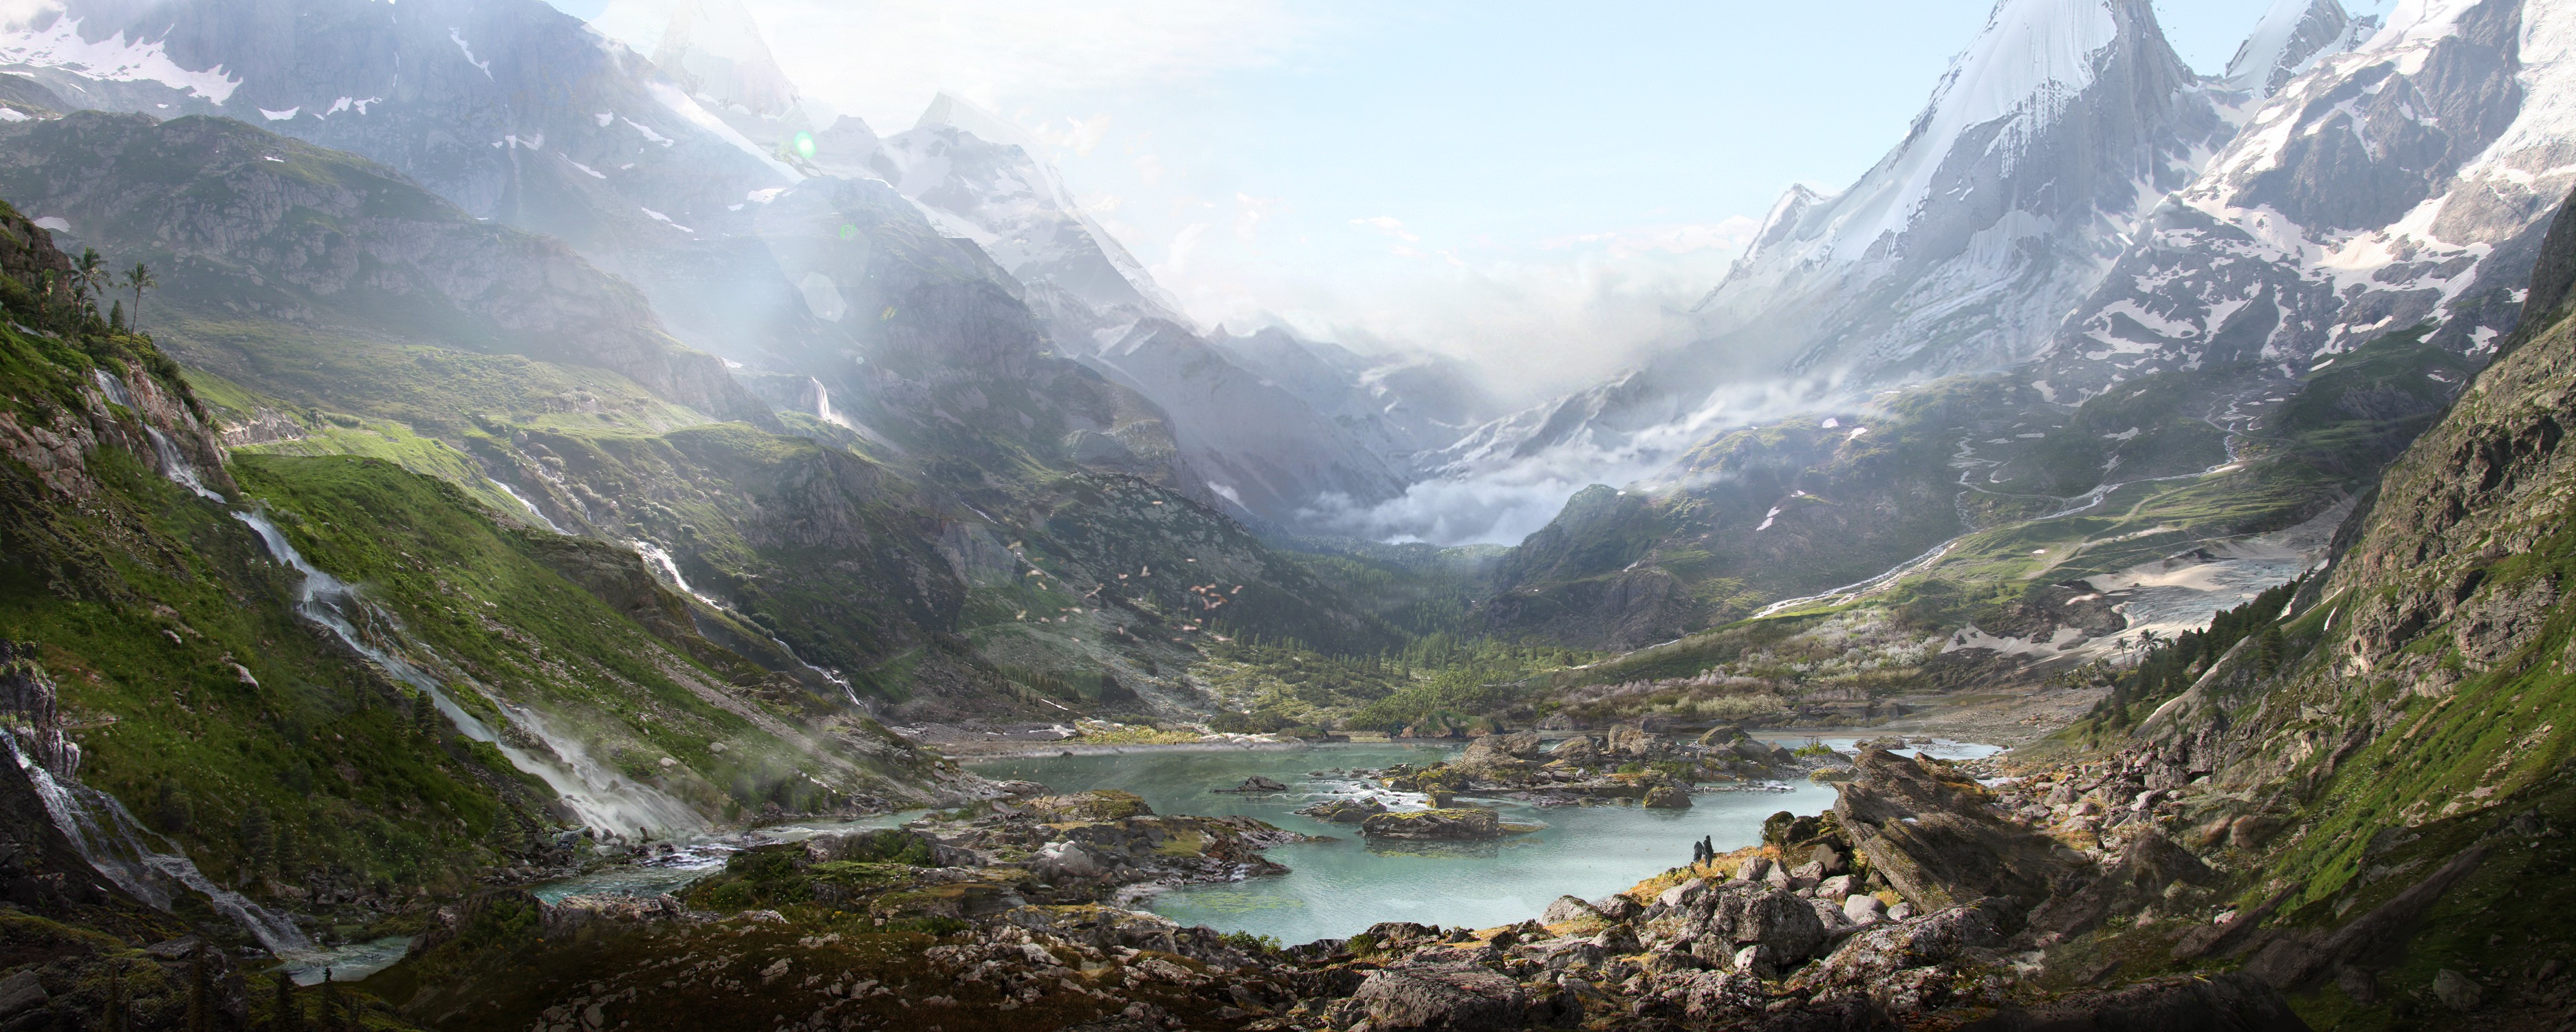 General 3746x1500 matte painting landscape nature mountains lake valley